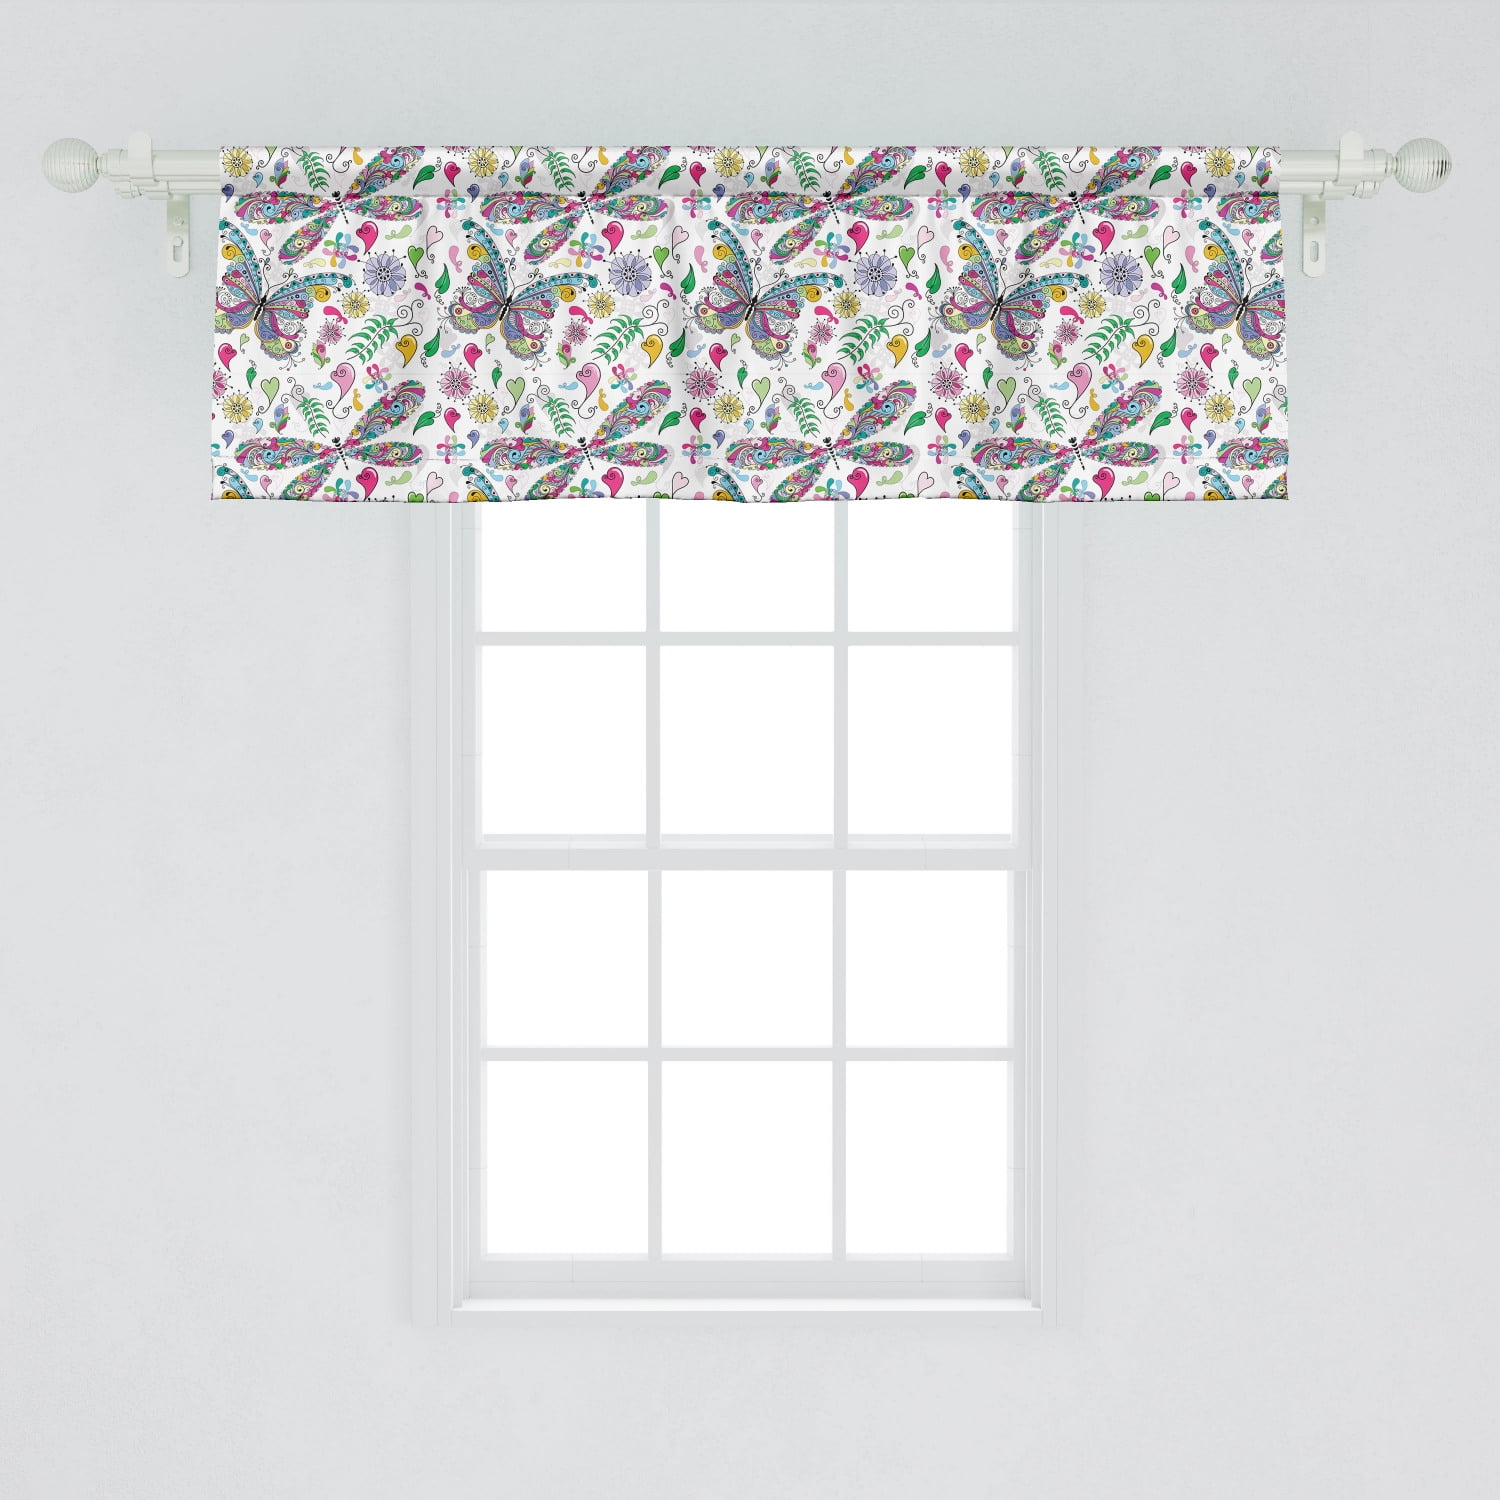 Ambesonne Dragonfly Window Valance, Butterfly Dragonfly Paisley Complex ...